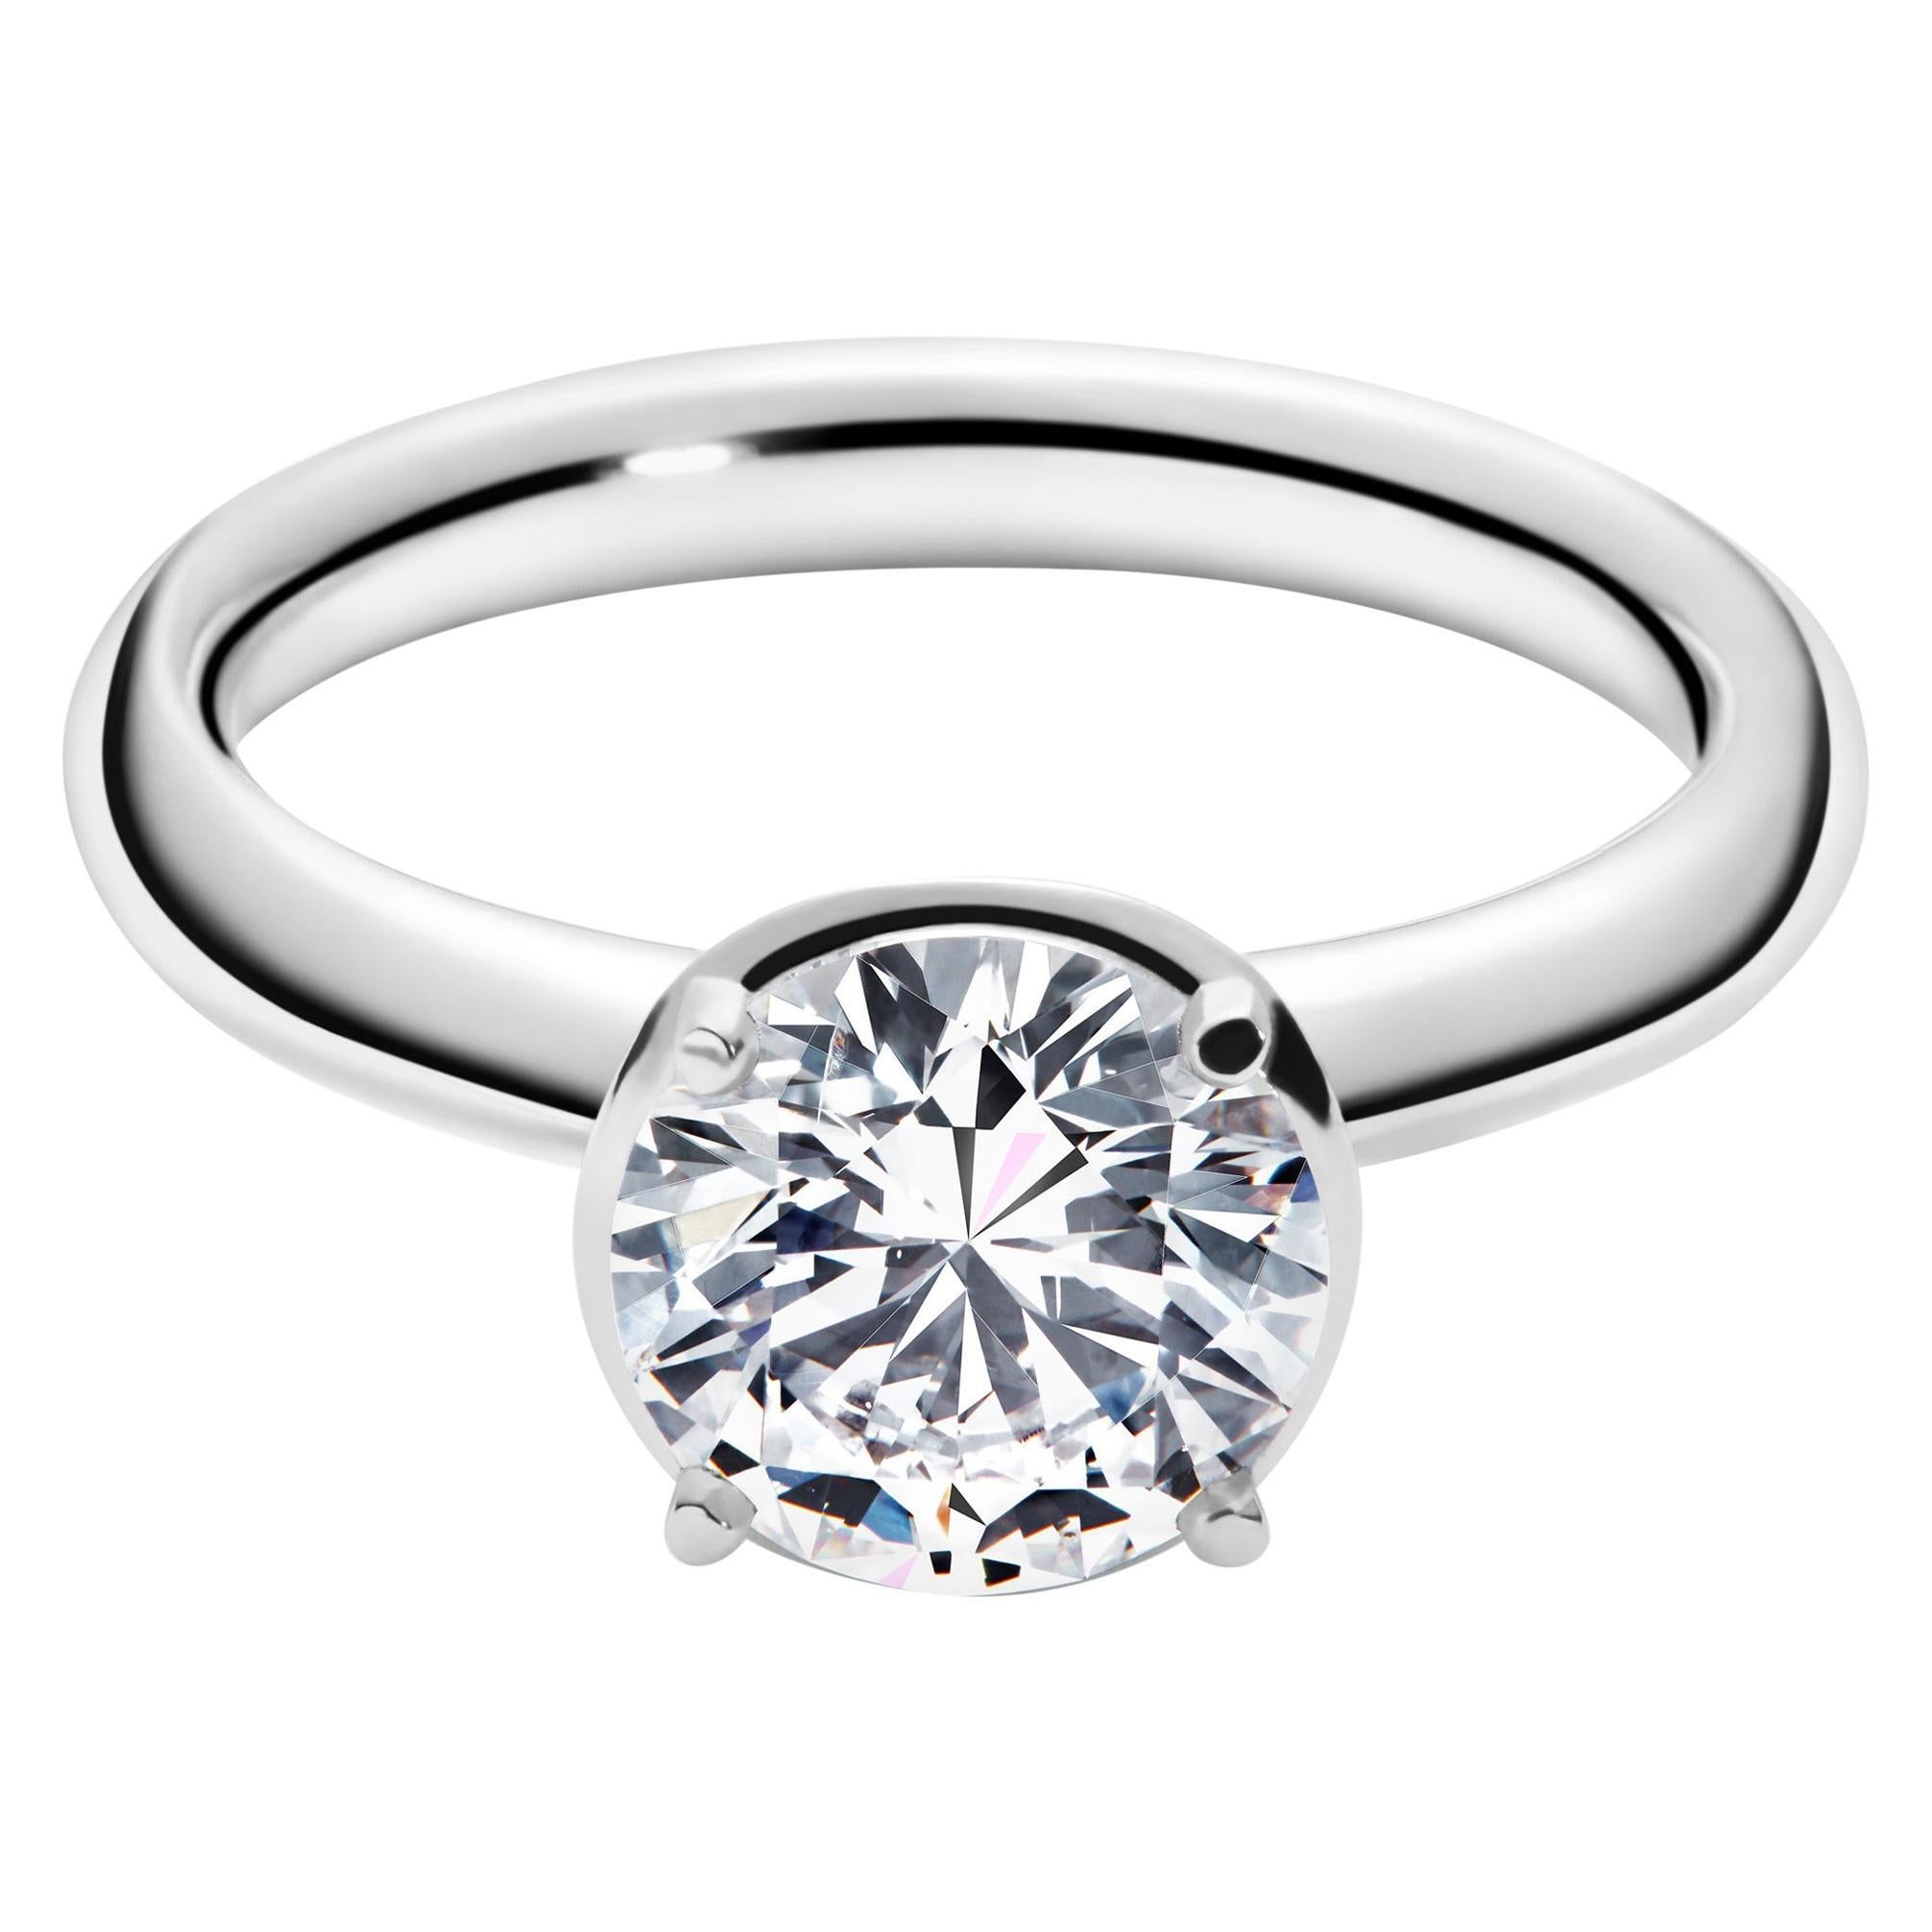 For Sale:  2 Carat Solitaire Traceable Diamond Ring in 18 Karat White Gold, Rocks for Life